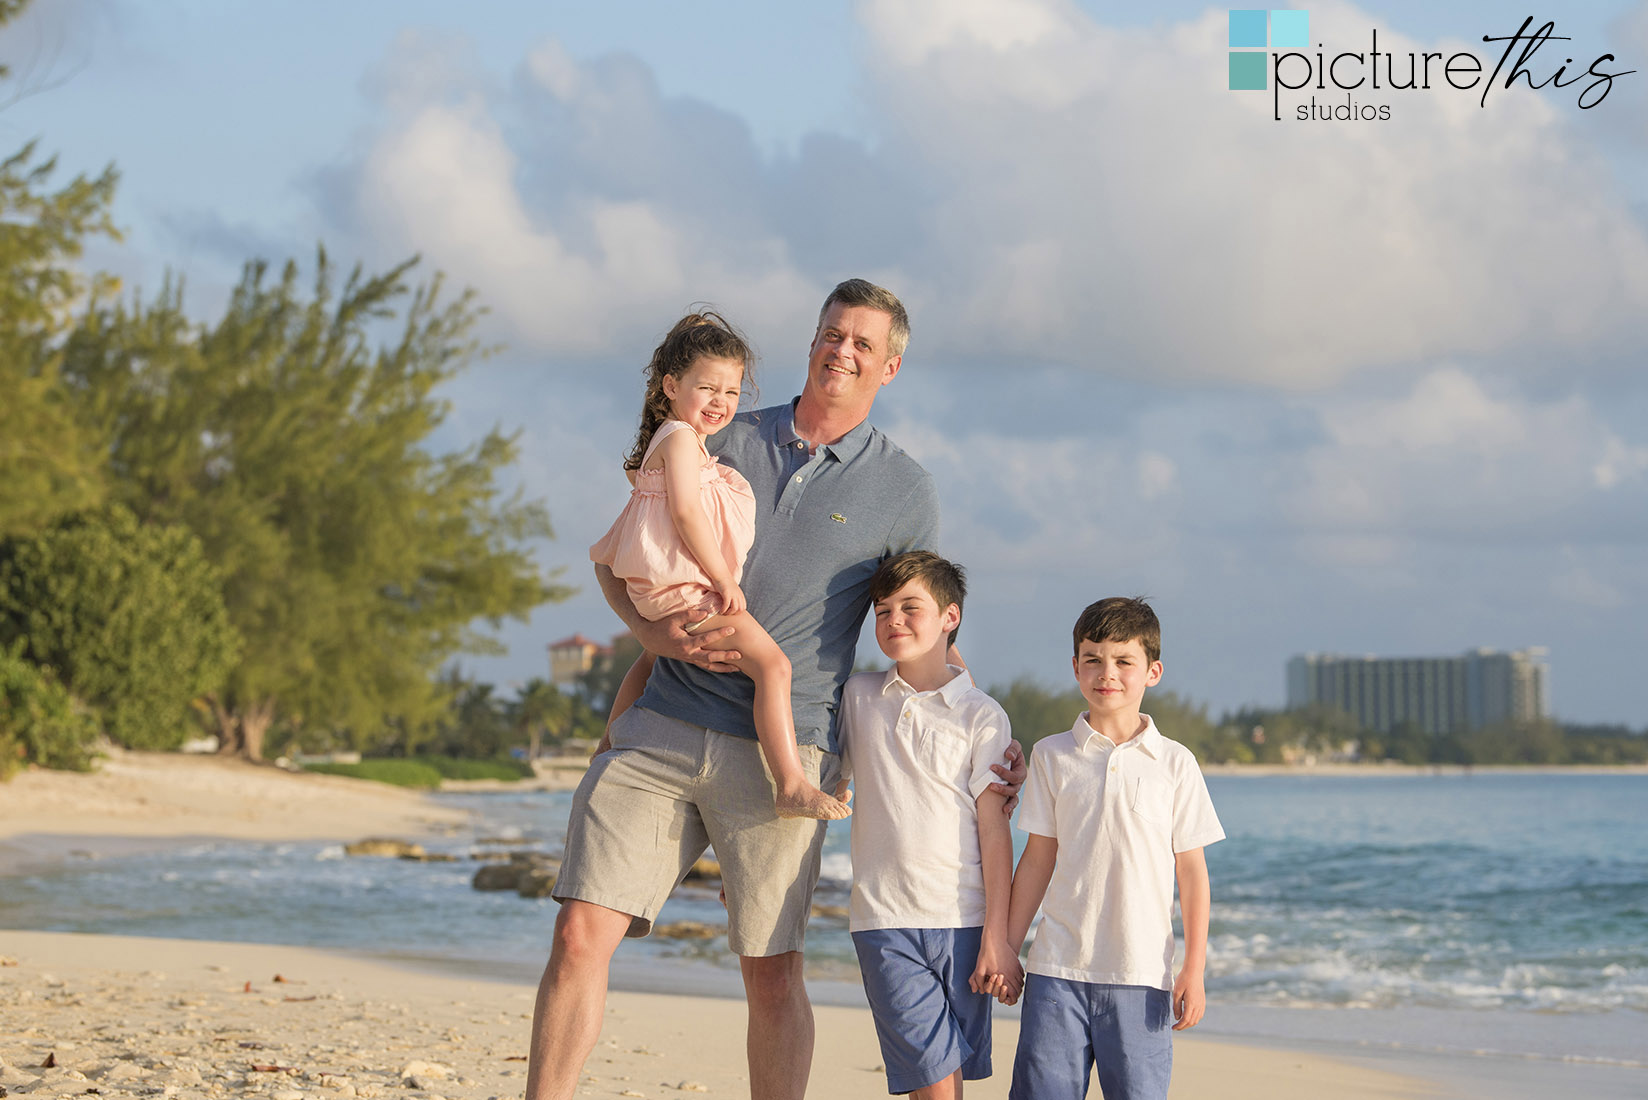 Happy Fathers Day 2021 from all of us Cayman Islands Photographers at Picture This Studios!